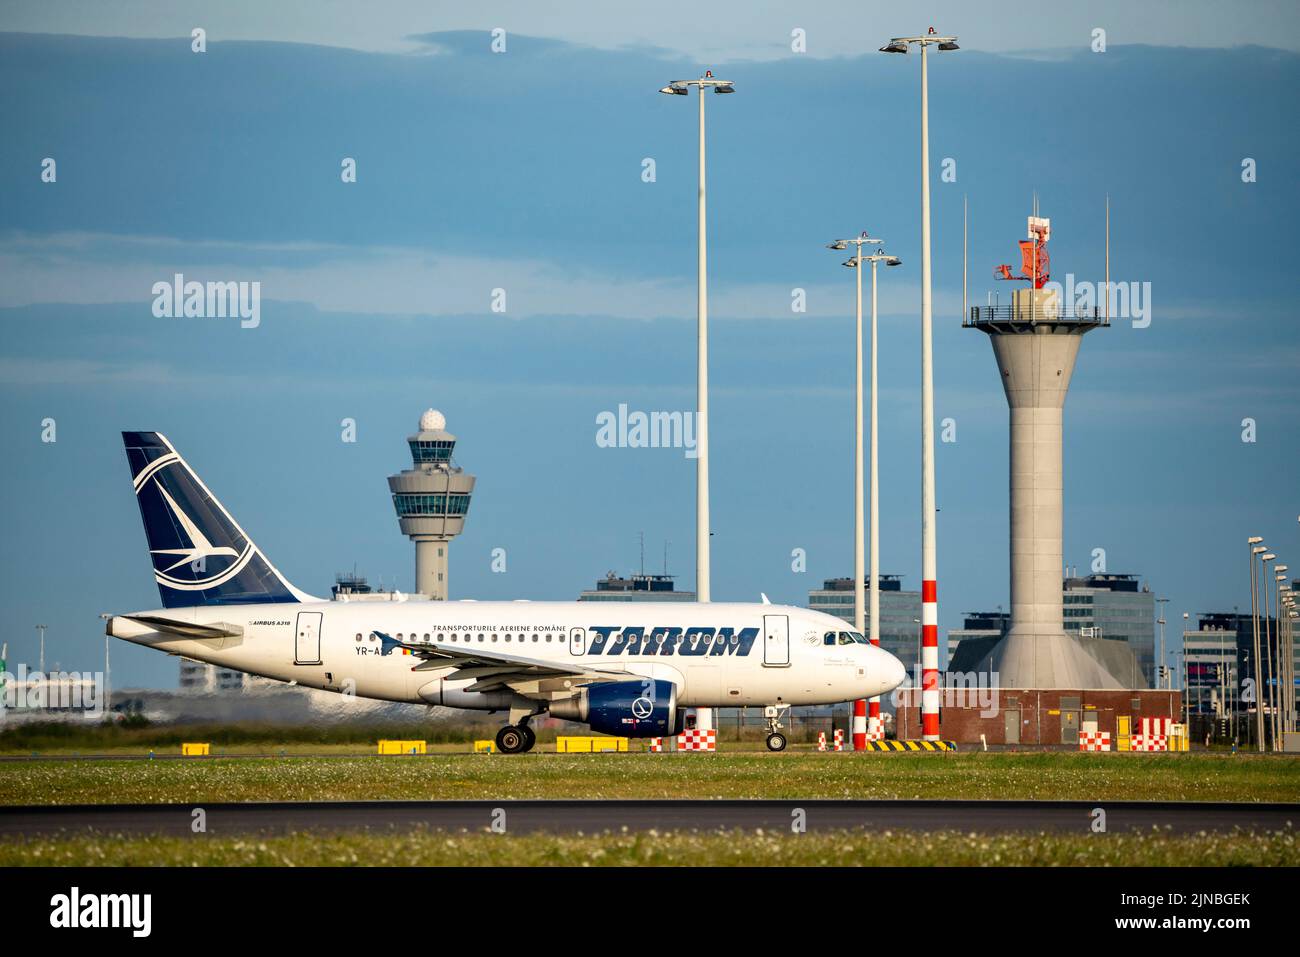 Amsterdam Shiphol Airport, Polderbaan, one of 6 runways, tower air traffic control, on taxiway for take-off, YR-ASB, TAROM Airbus A318-100. Stock Photo